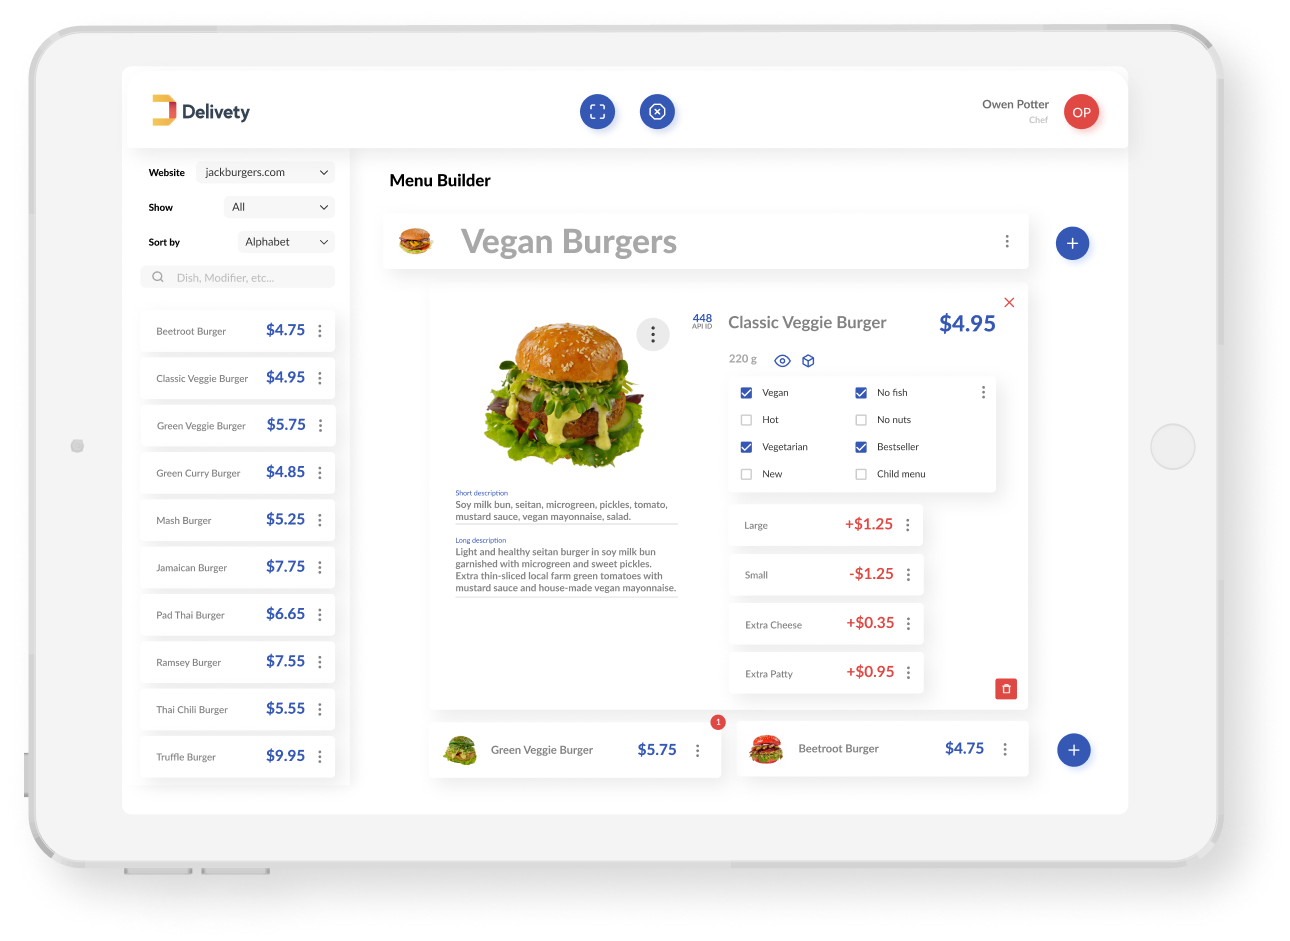 Manage modifiers, sizes and extras in your food ordering menu